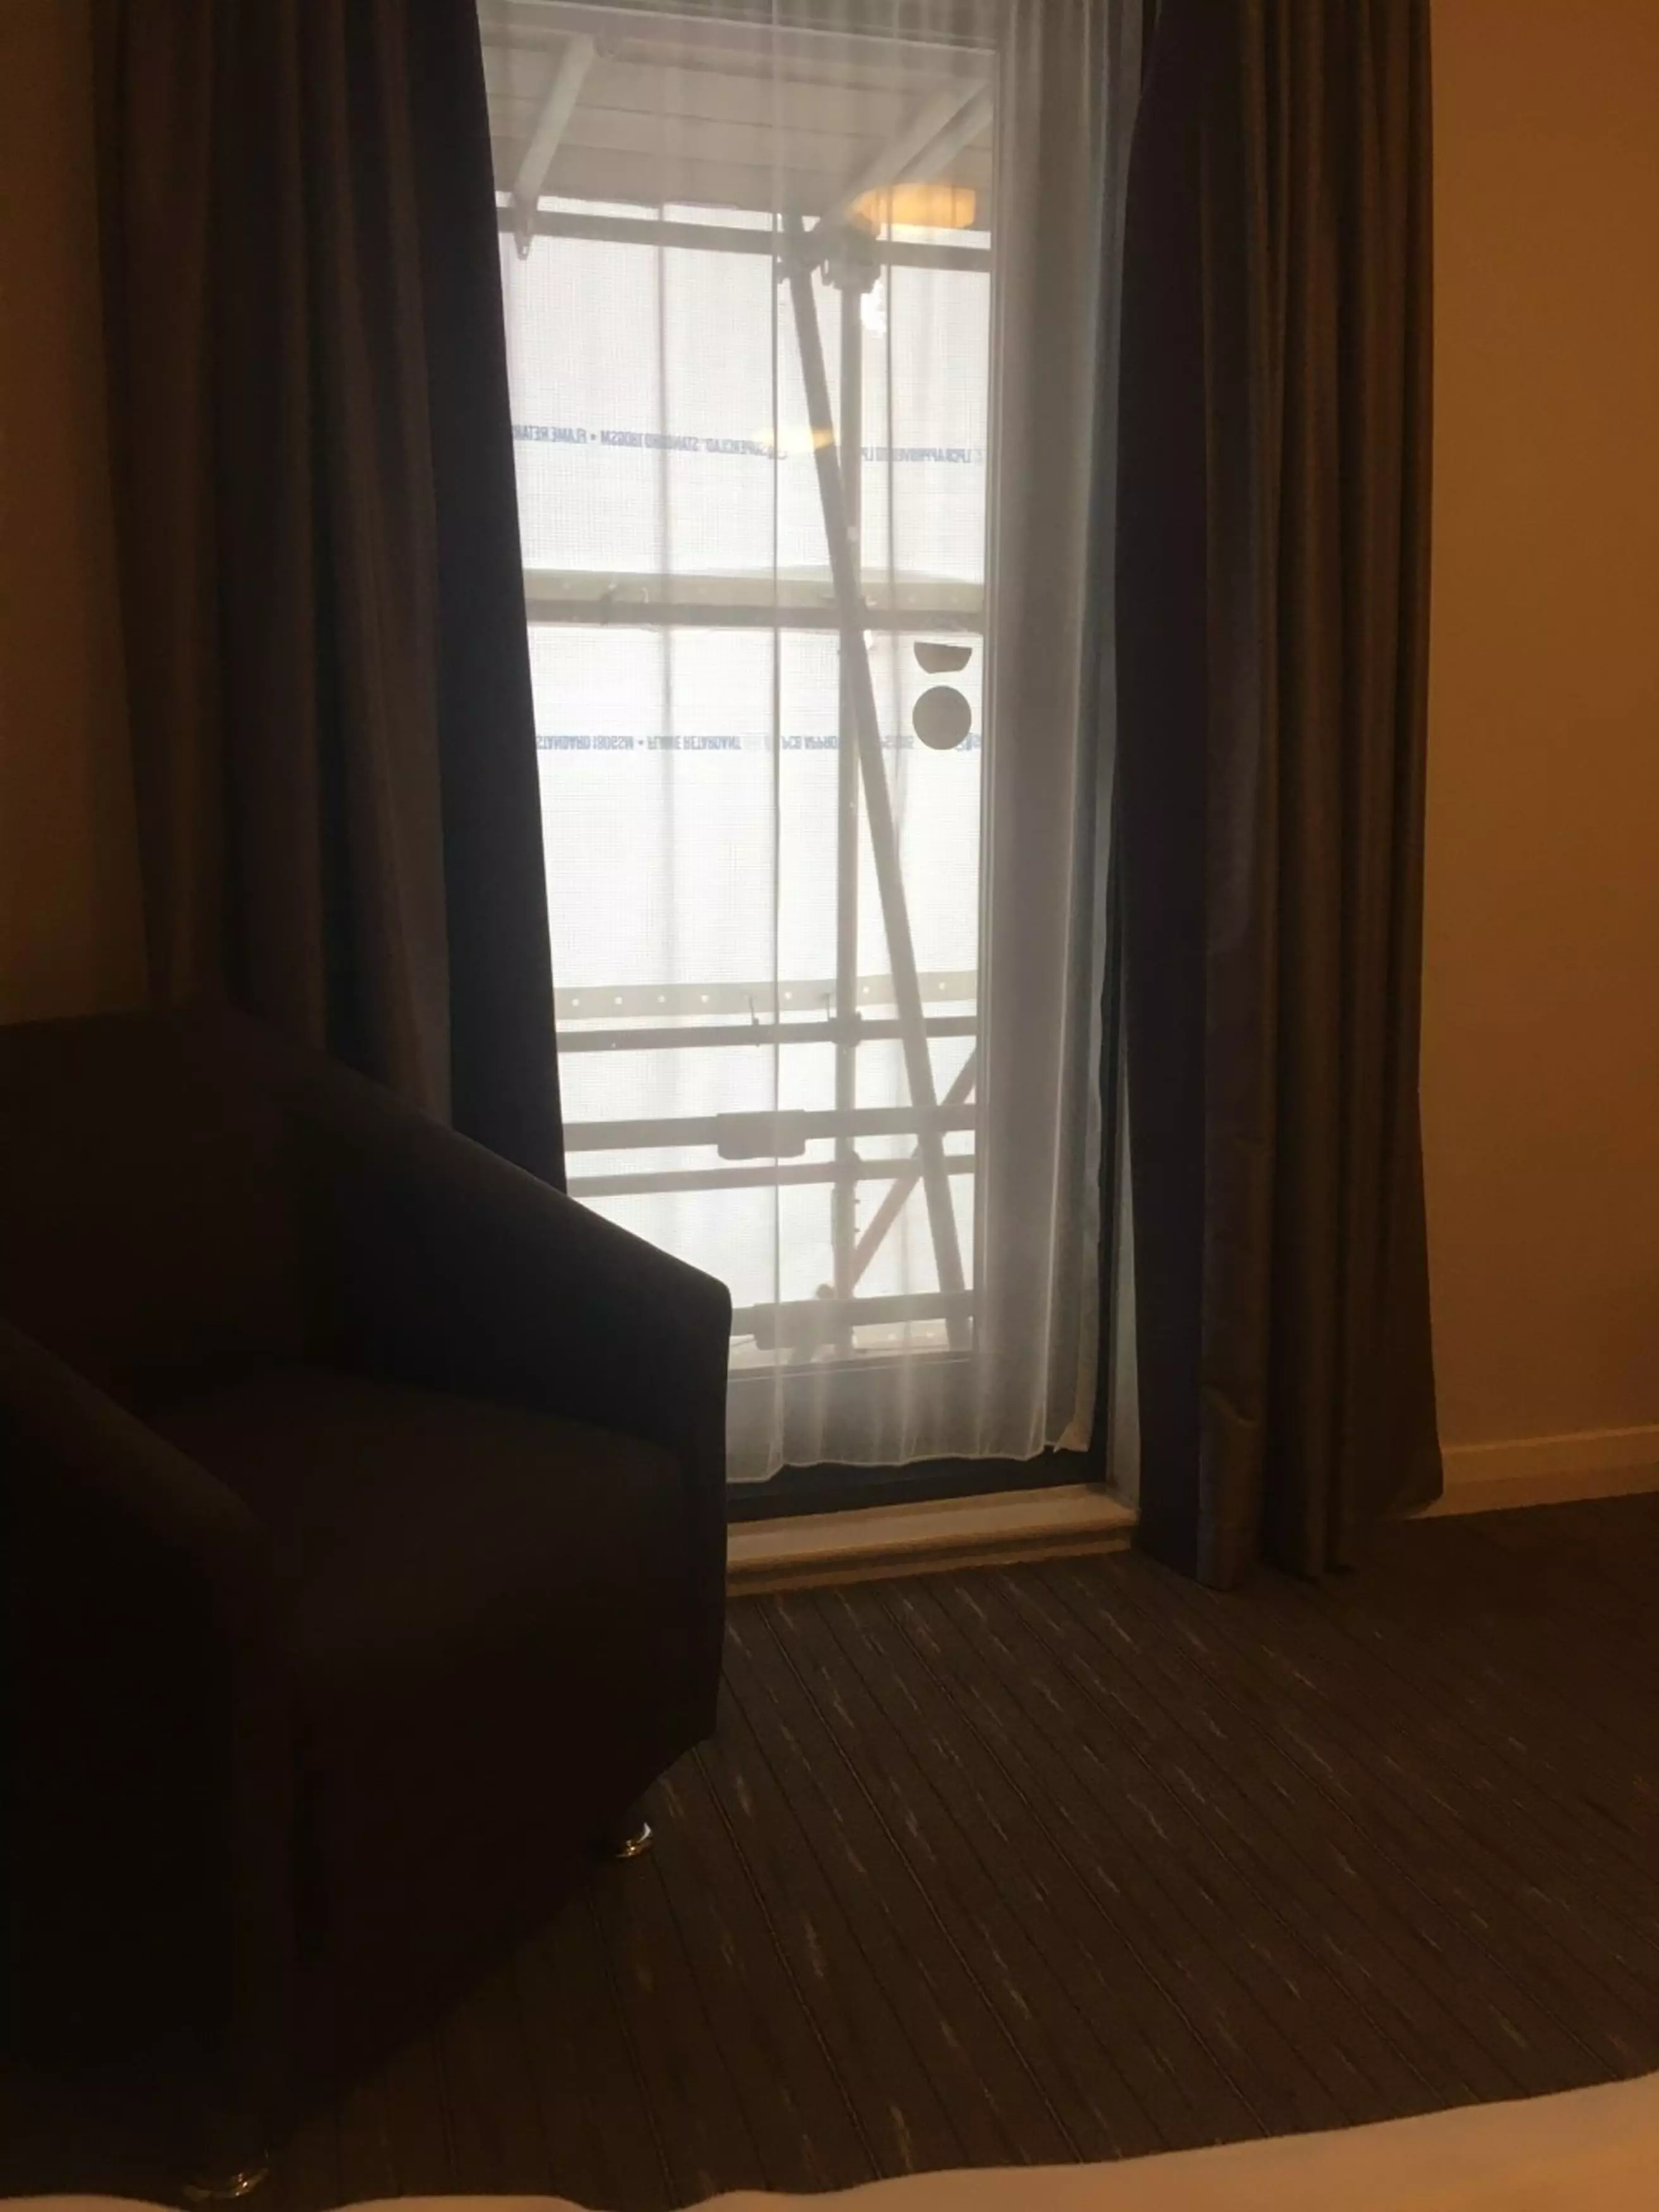 The couple also shared pictures of their obstructed view from the inside of their hotel room (